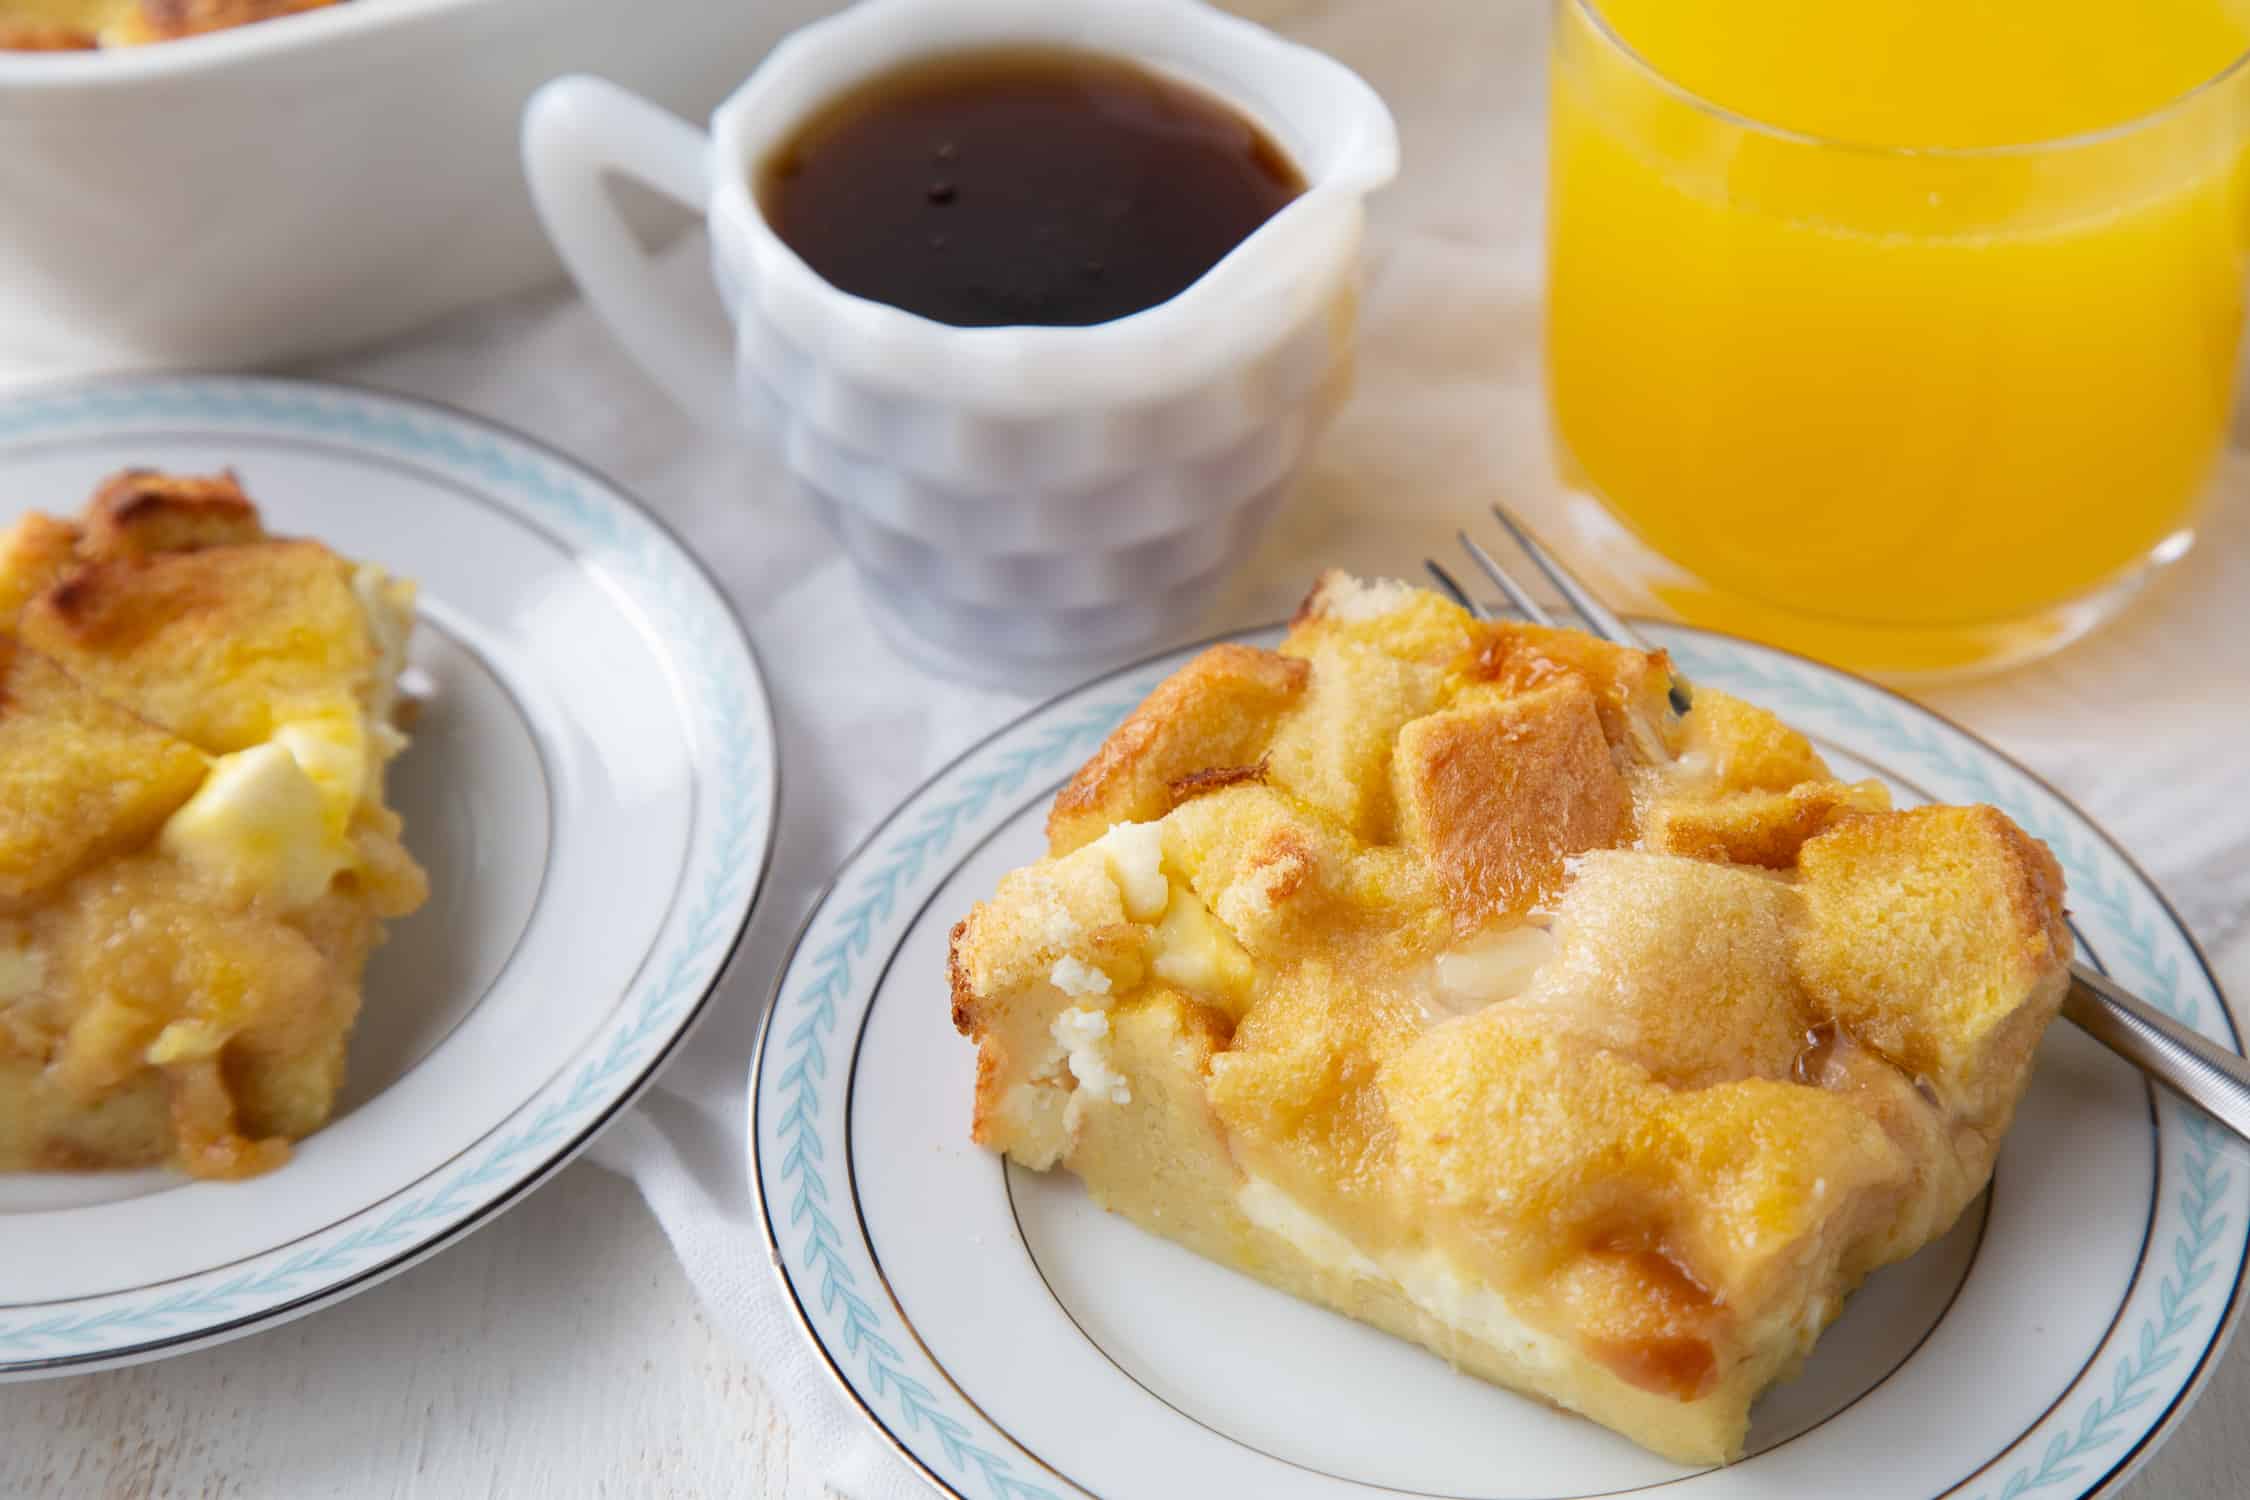 slice of stuffed french toast next to a white cup of maple syrup and a glass of orange juice.